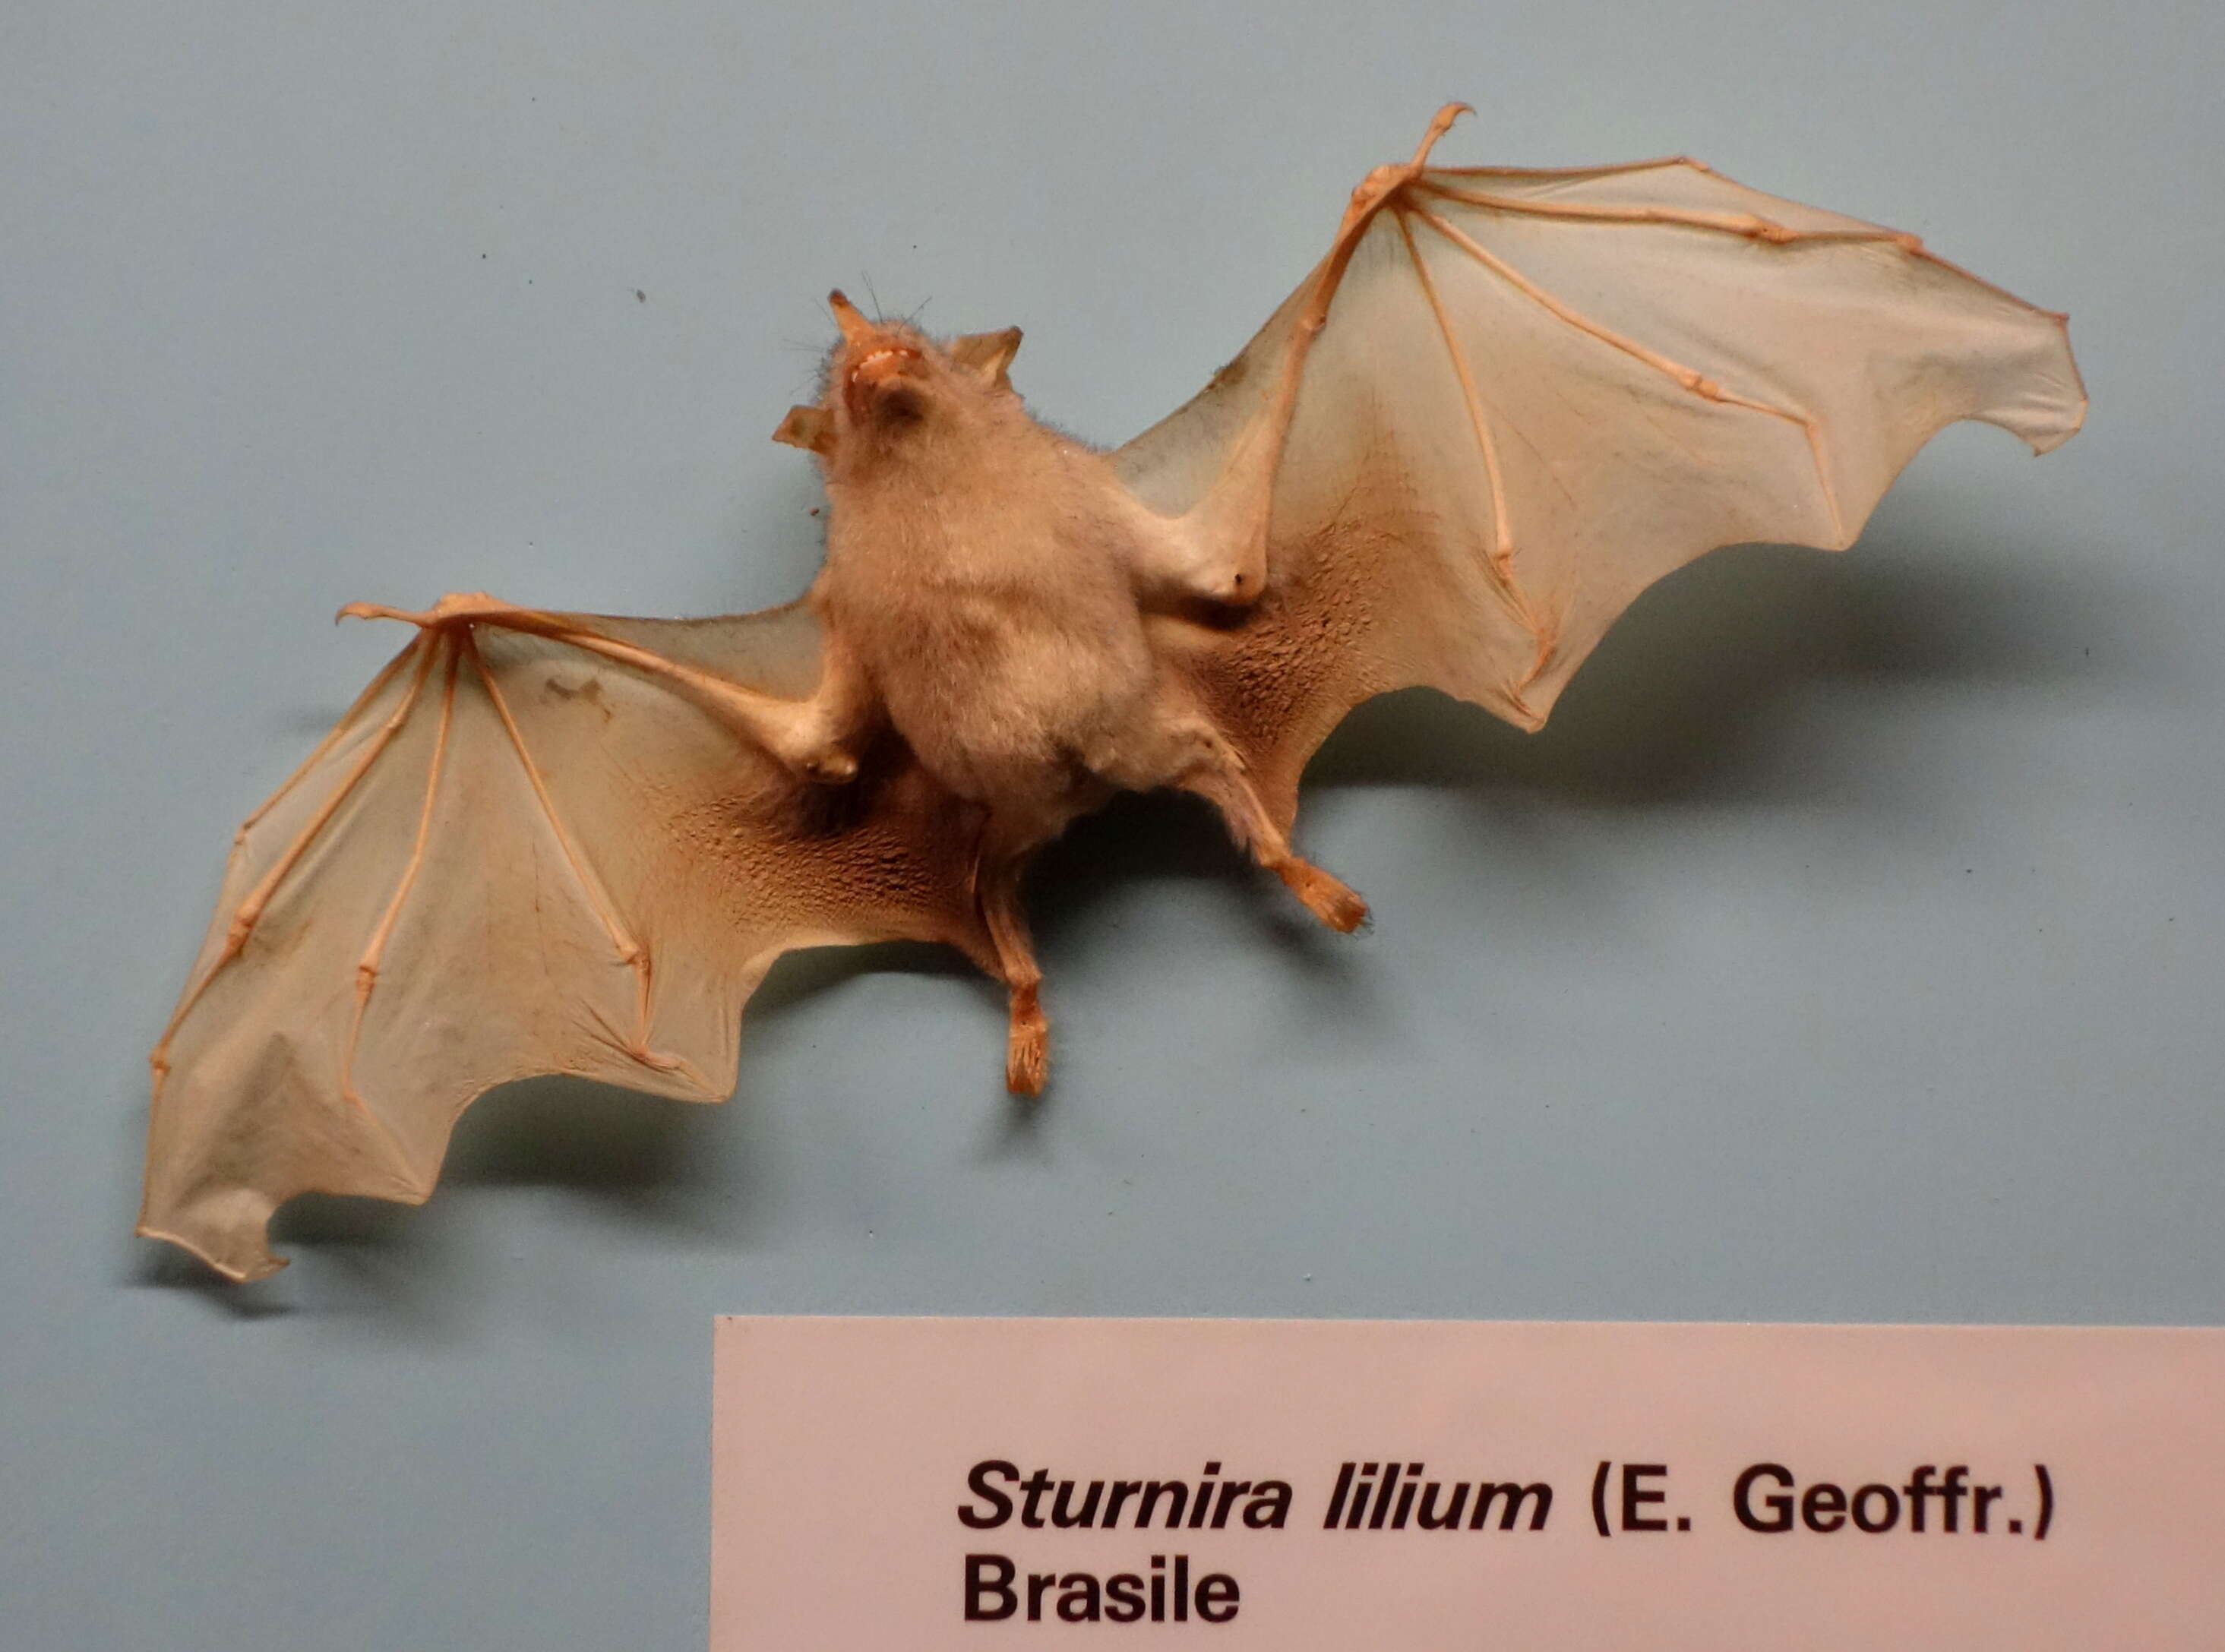 Image of Little Yellow-shouldered Bat